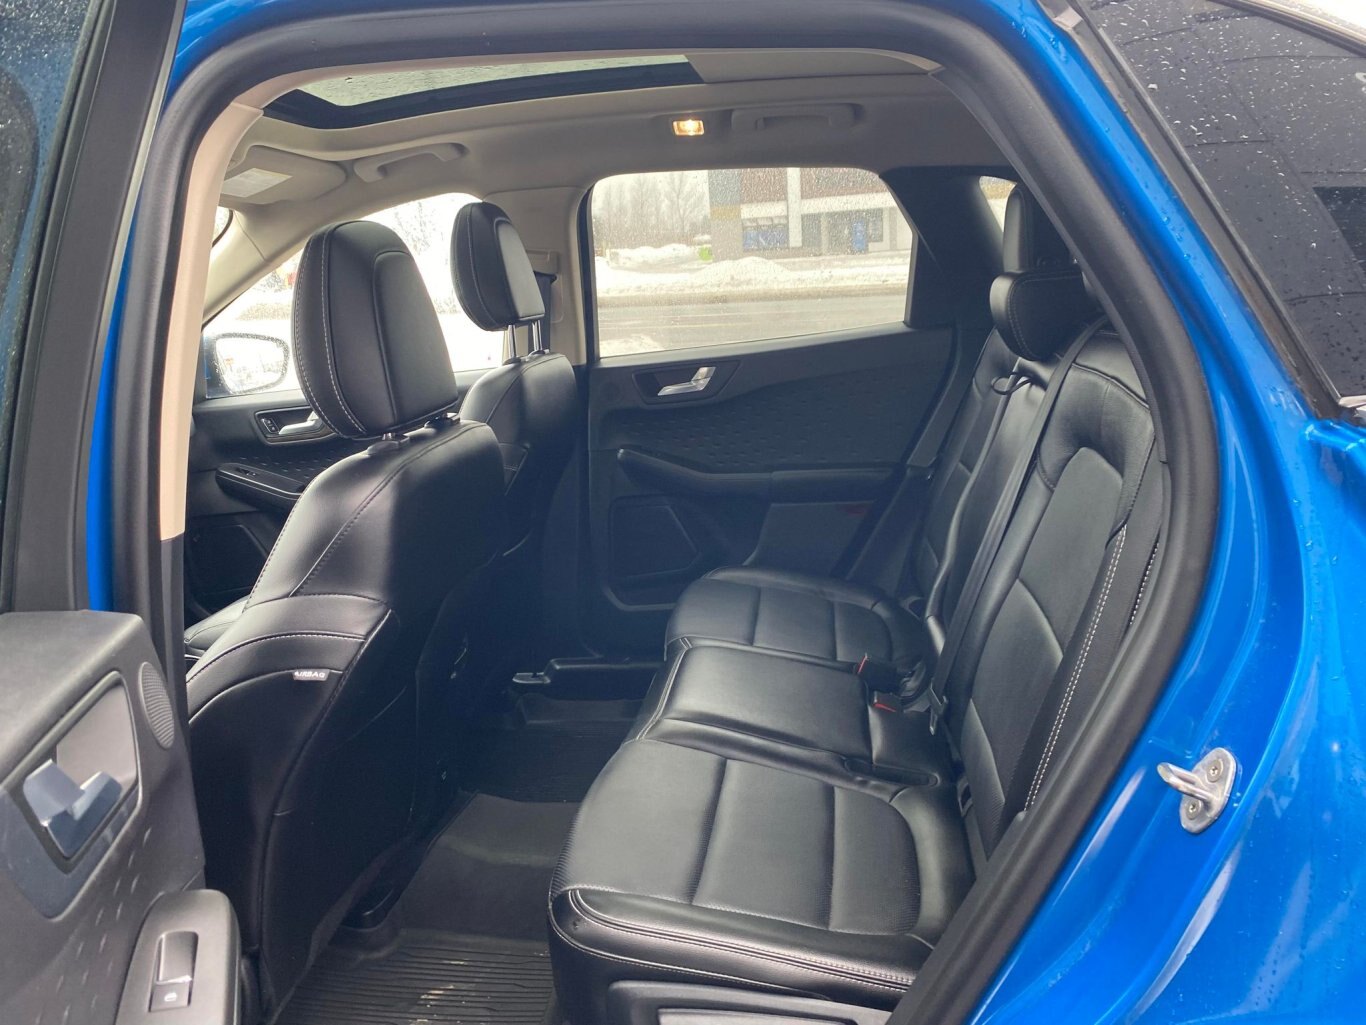 2020 FORD ESCAPE TITANIUM ECOBOOST AWD WITH SUNROOF, LEATHER SEATS, HEATED SEATS, HEATED STEERING WHEEL, REAR VIEW CAMERA AND NAVIGATION!!